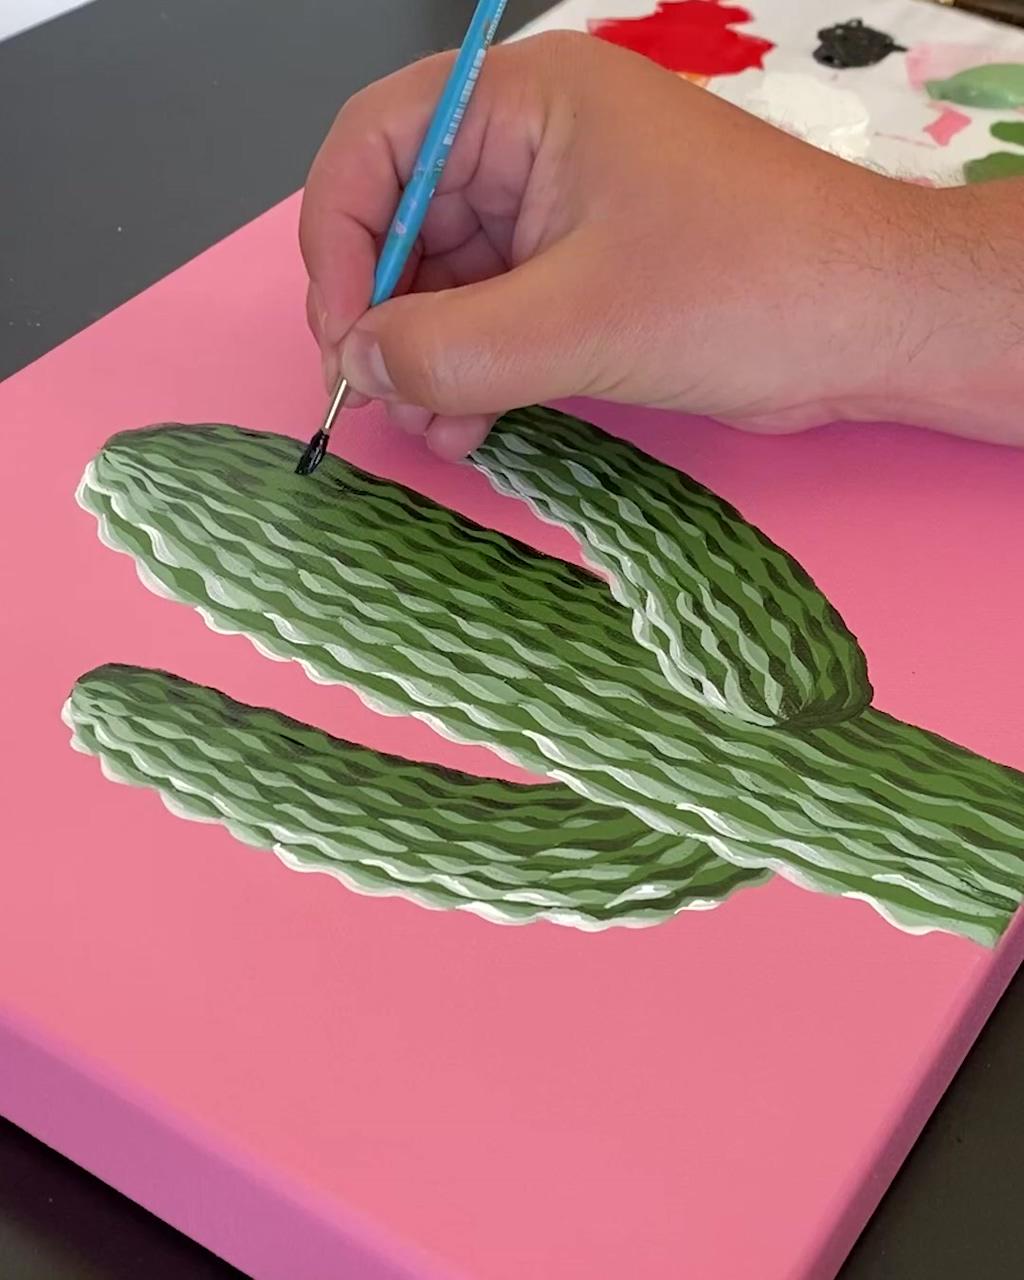  acrylic painting a saguaro cactus by philip boelter; canvas painting tutorials